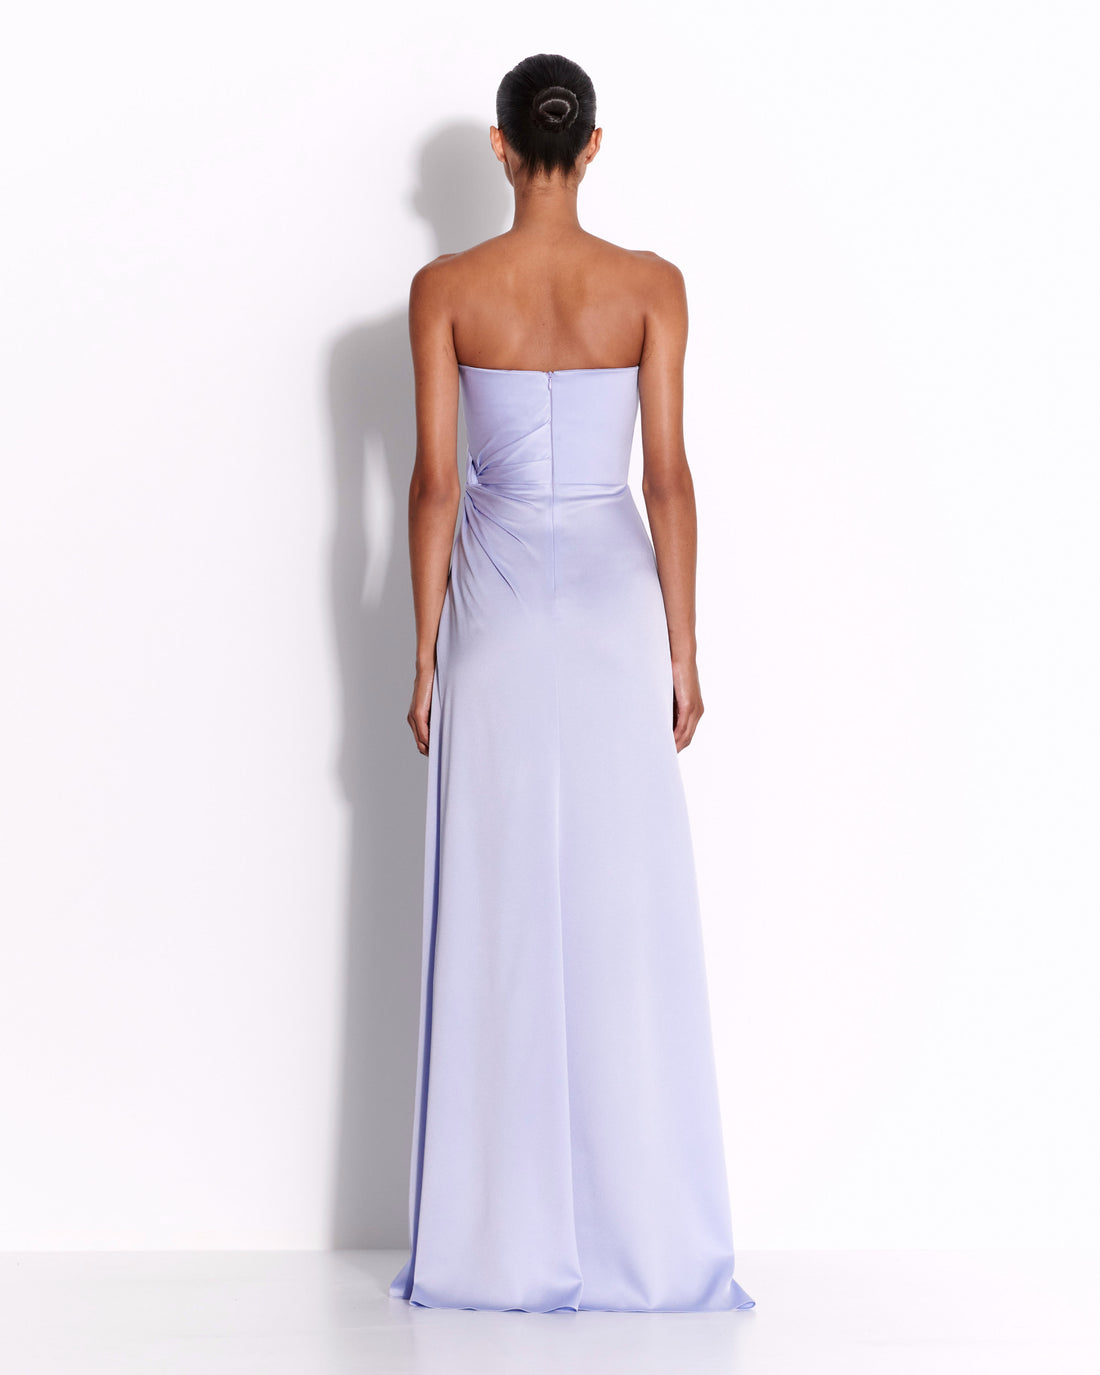 Strapless Twist Gown in Satin Crepe